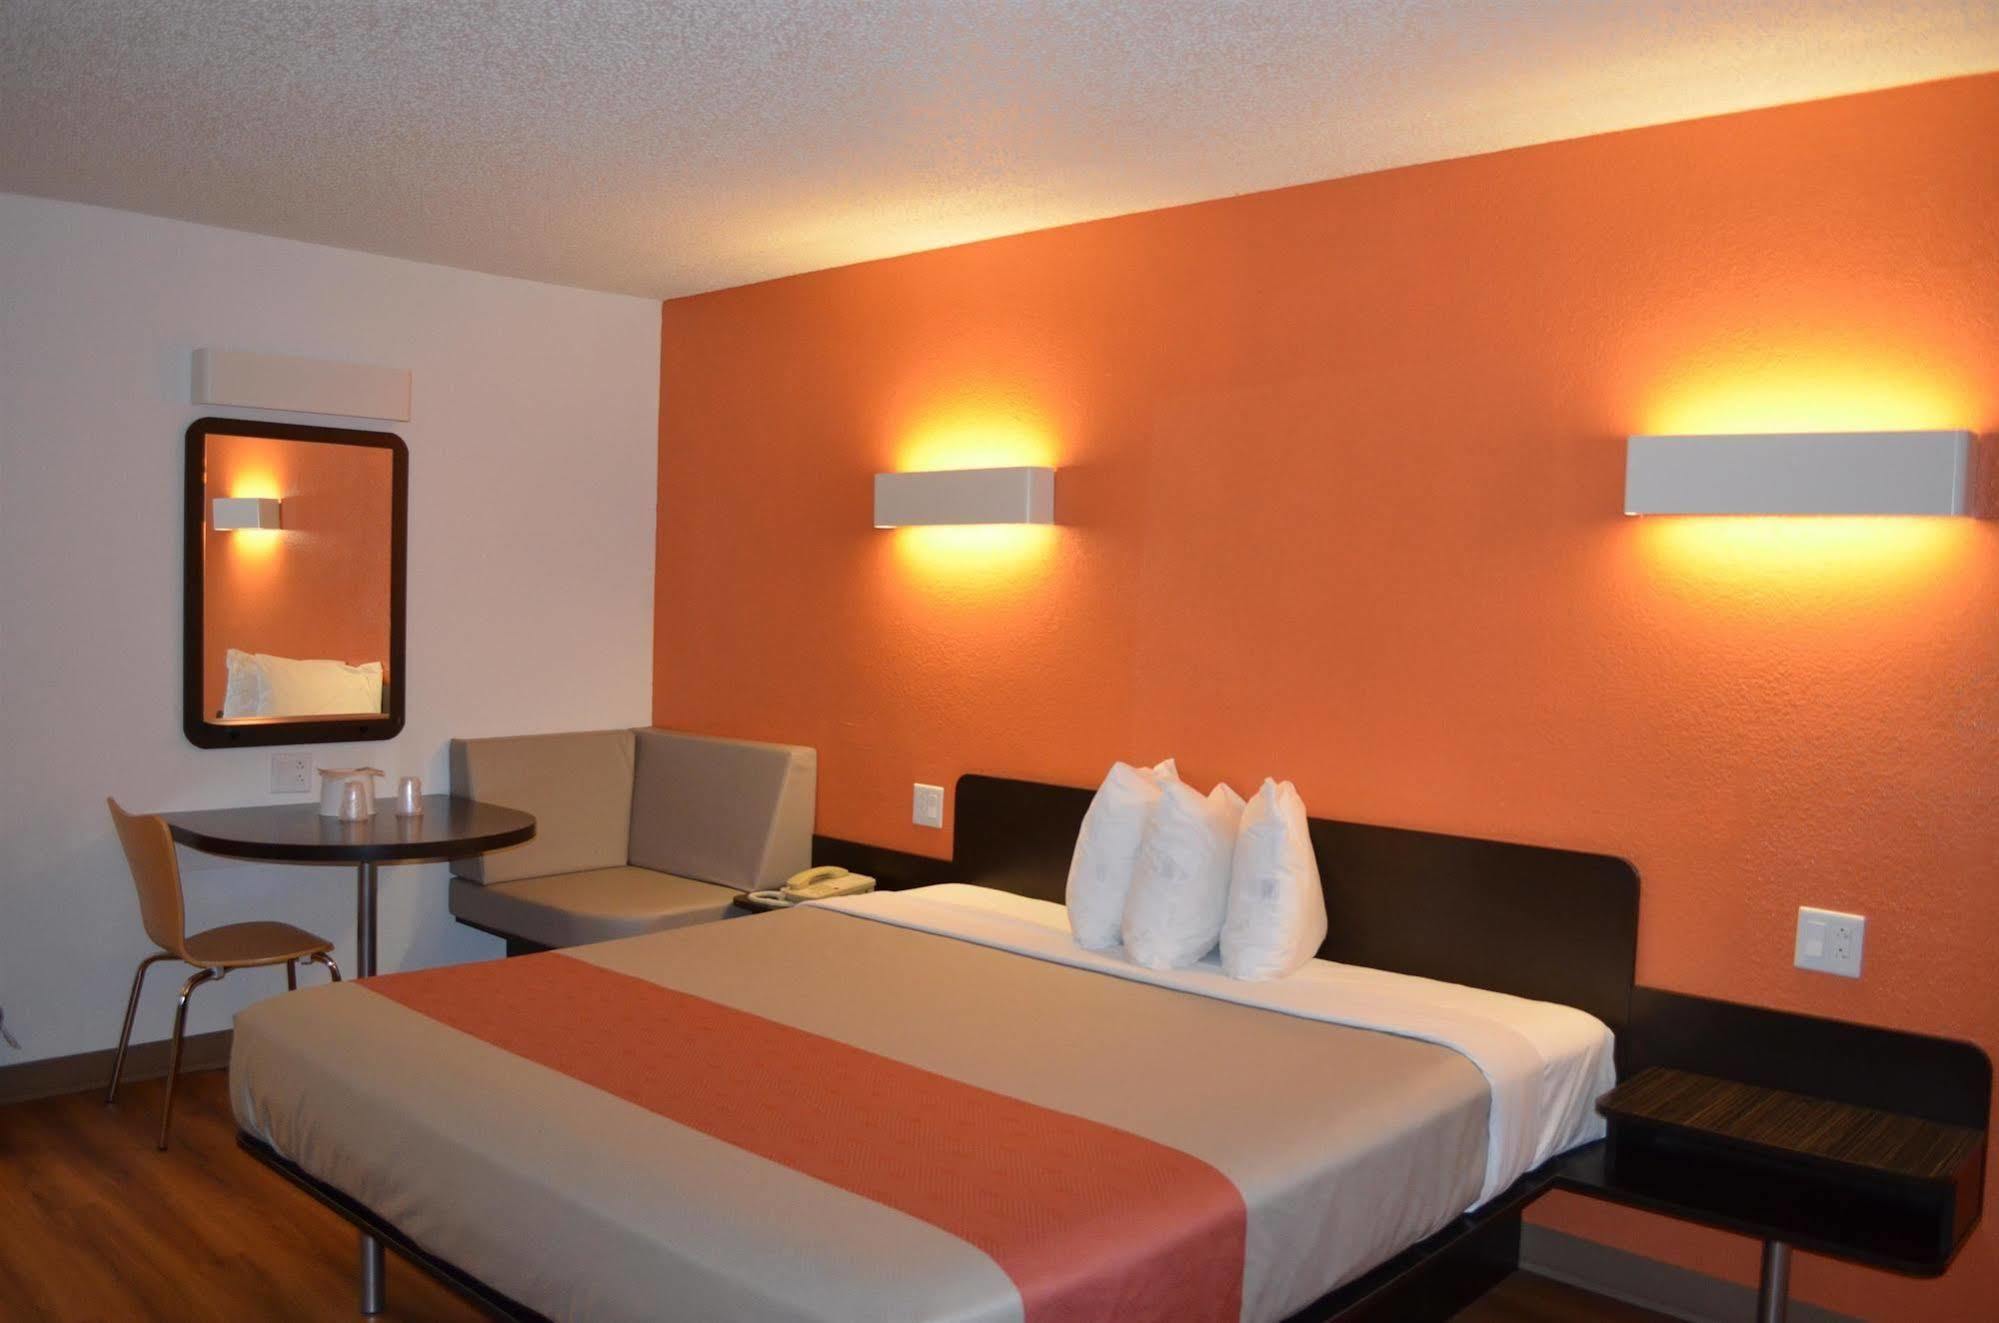 Motel 6 - Newest - Ultra Sparkling Approved - Chiropractor Approved Beds - New Elevator - Robotic Massages - New 2023 Amenities - New Rooms - New Flat Screen Tvs - All American Staff - Walk To Longhorn Steakhouse And Ruby Tuesday - Book Today And Sav Kingsland Εξωτερικό φωτογραφία